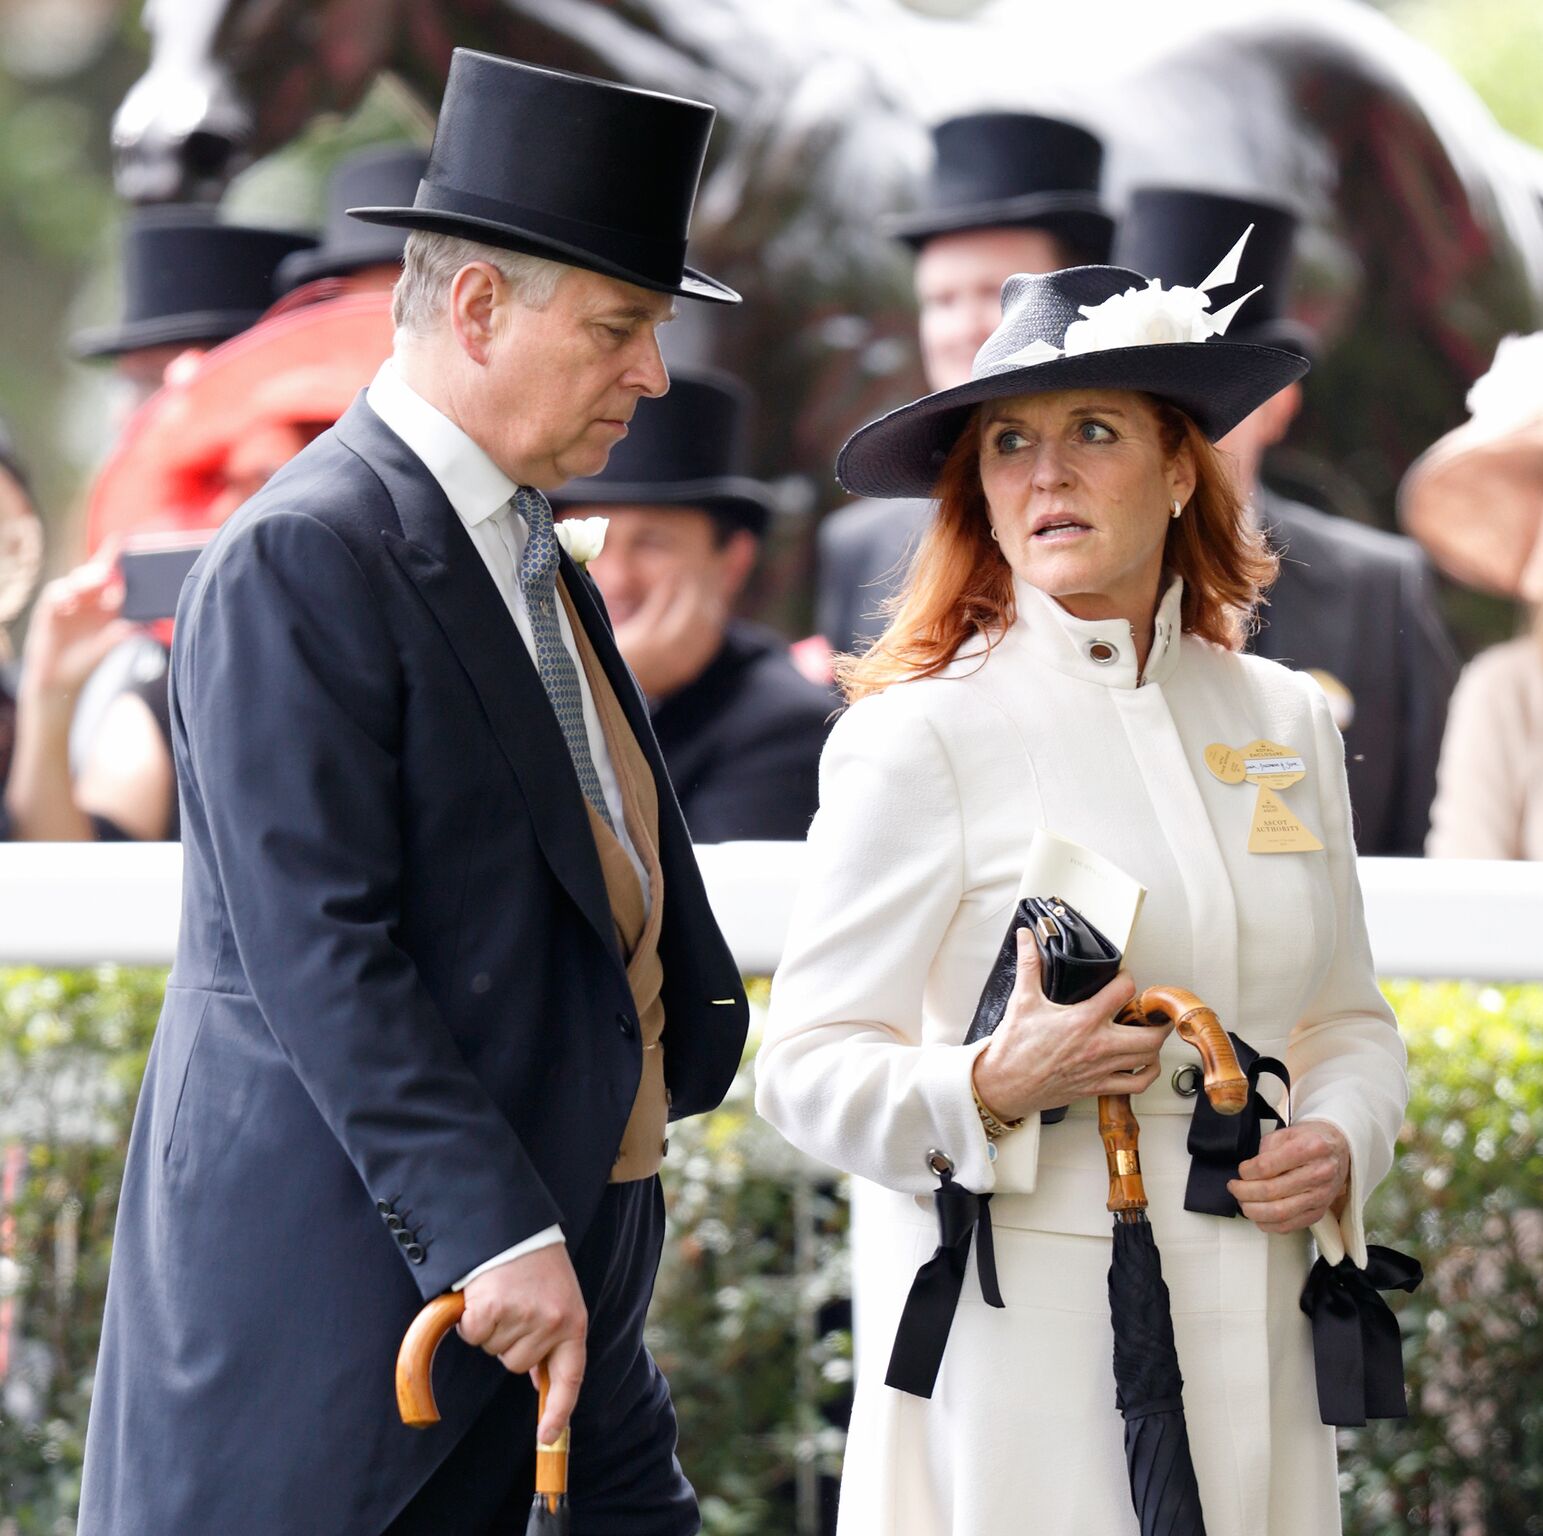 Prince Andrew and Sarah Ferguson attend day 4 of Royal Ascot | Getty Images